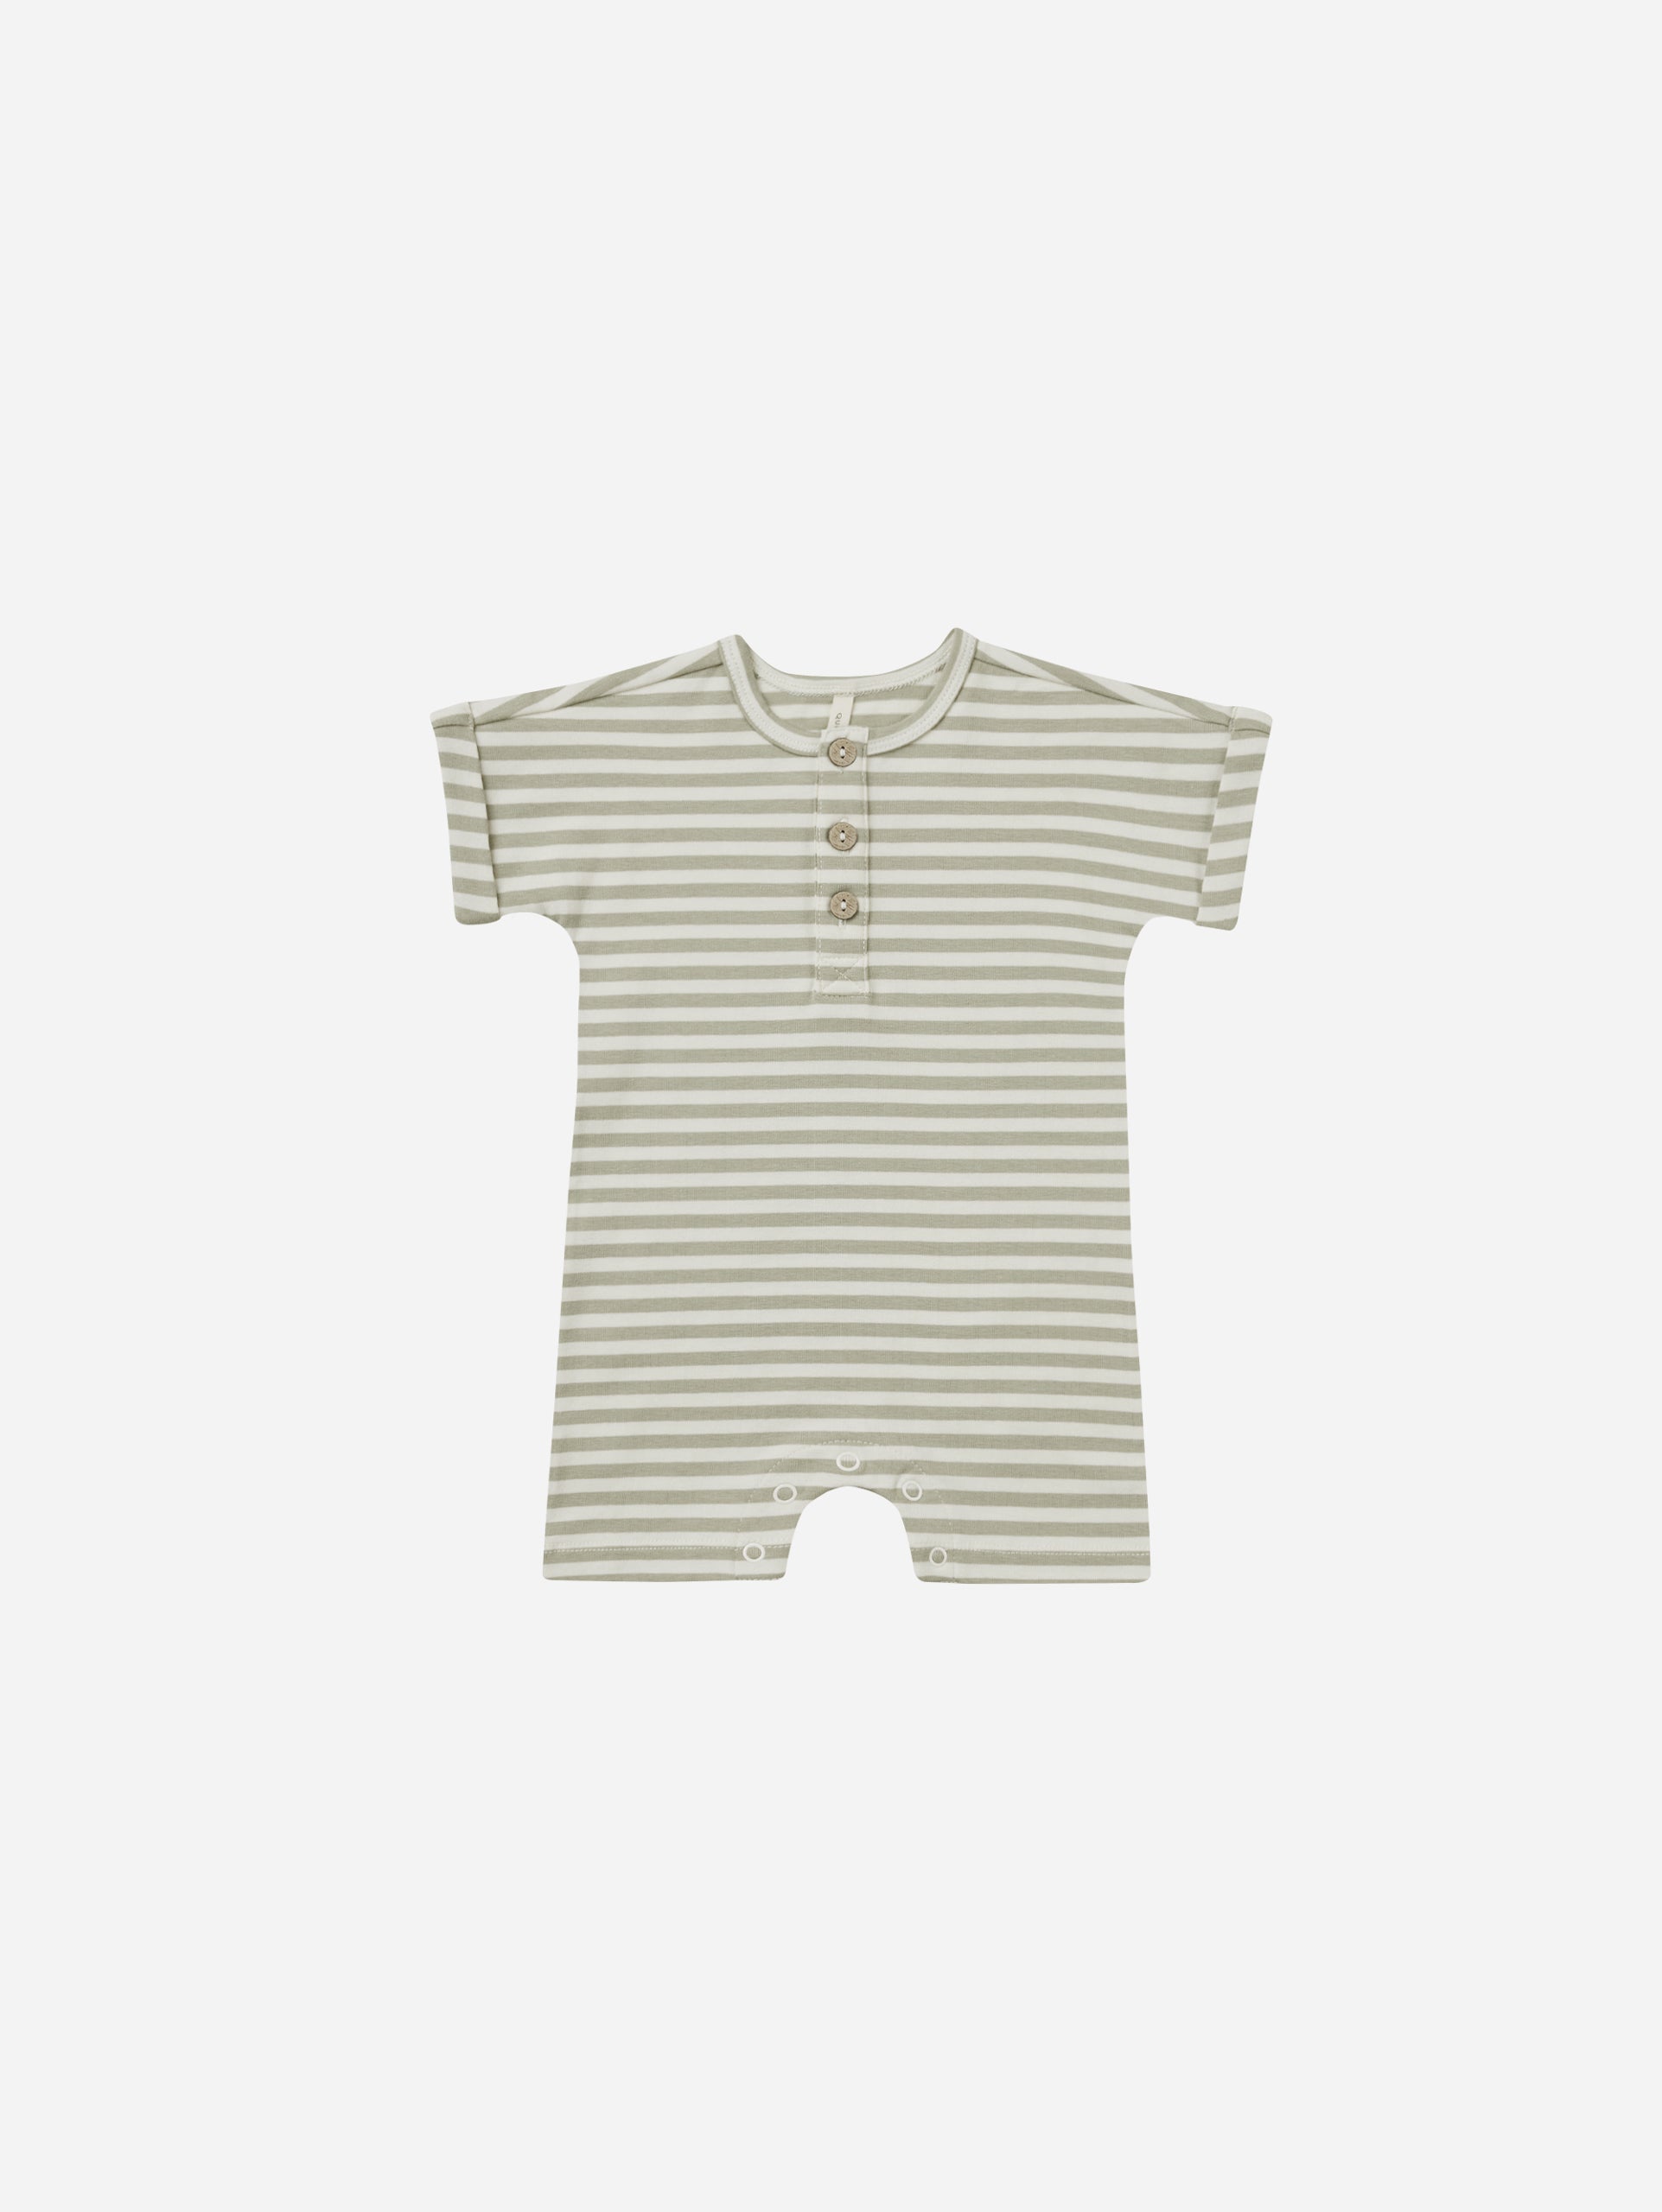 Short Sleeve One-Piece || Sage Stripe - Rylee + Cru | Kids Clothes | Trendy Baby Clothes | Modern Infant Outfits |